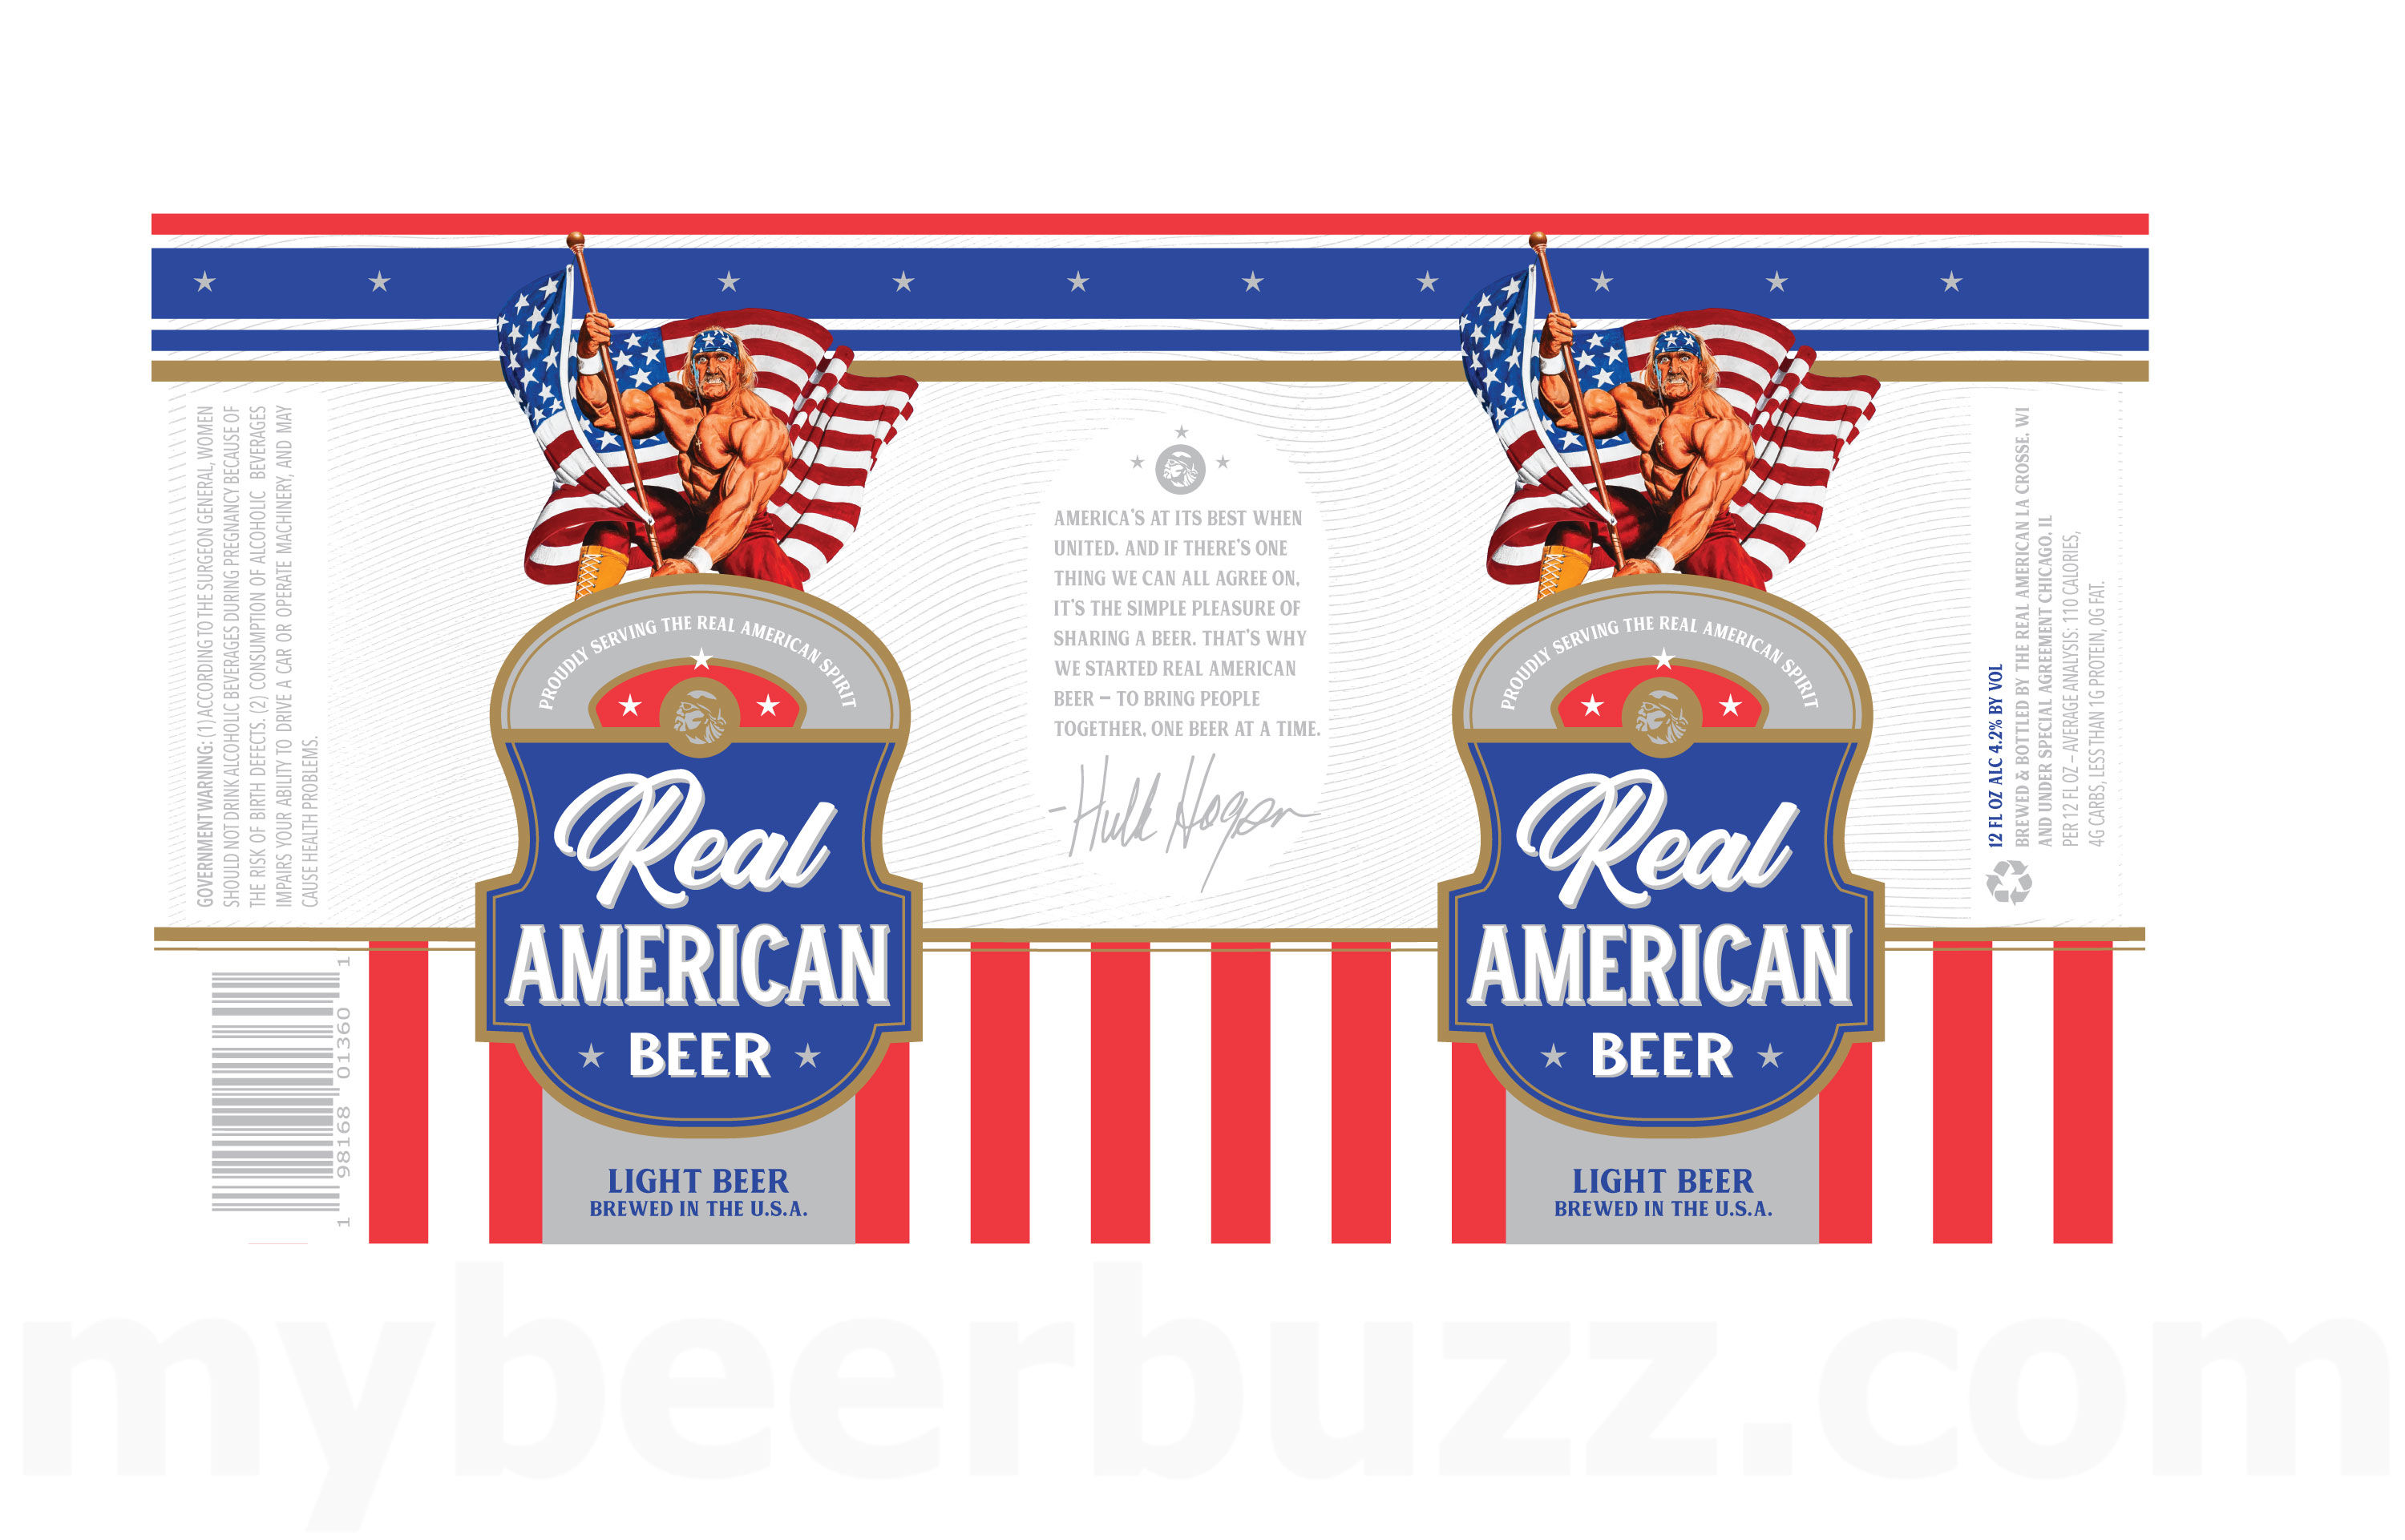 Great Central Brewing / The Real American Adding Real American Beer With Hulk Hogan